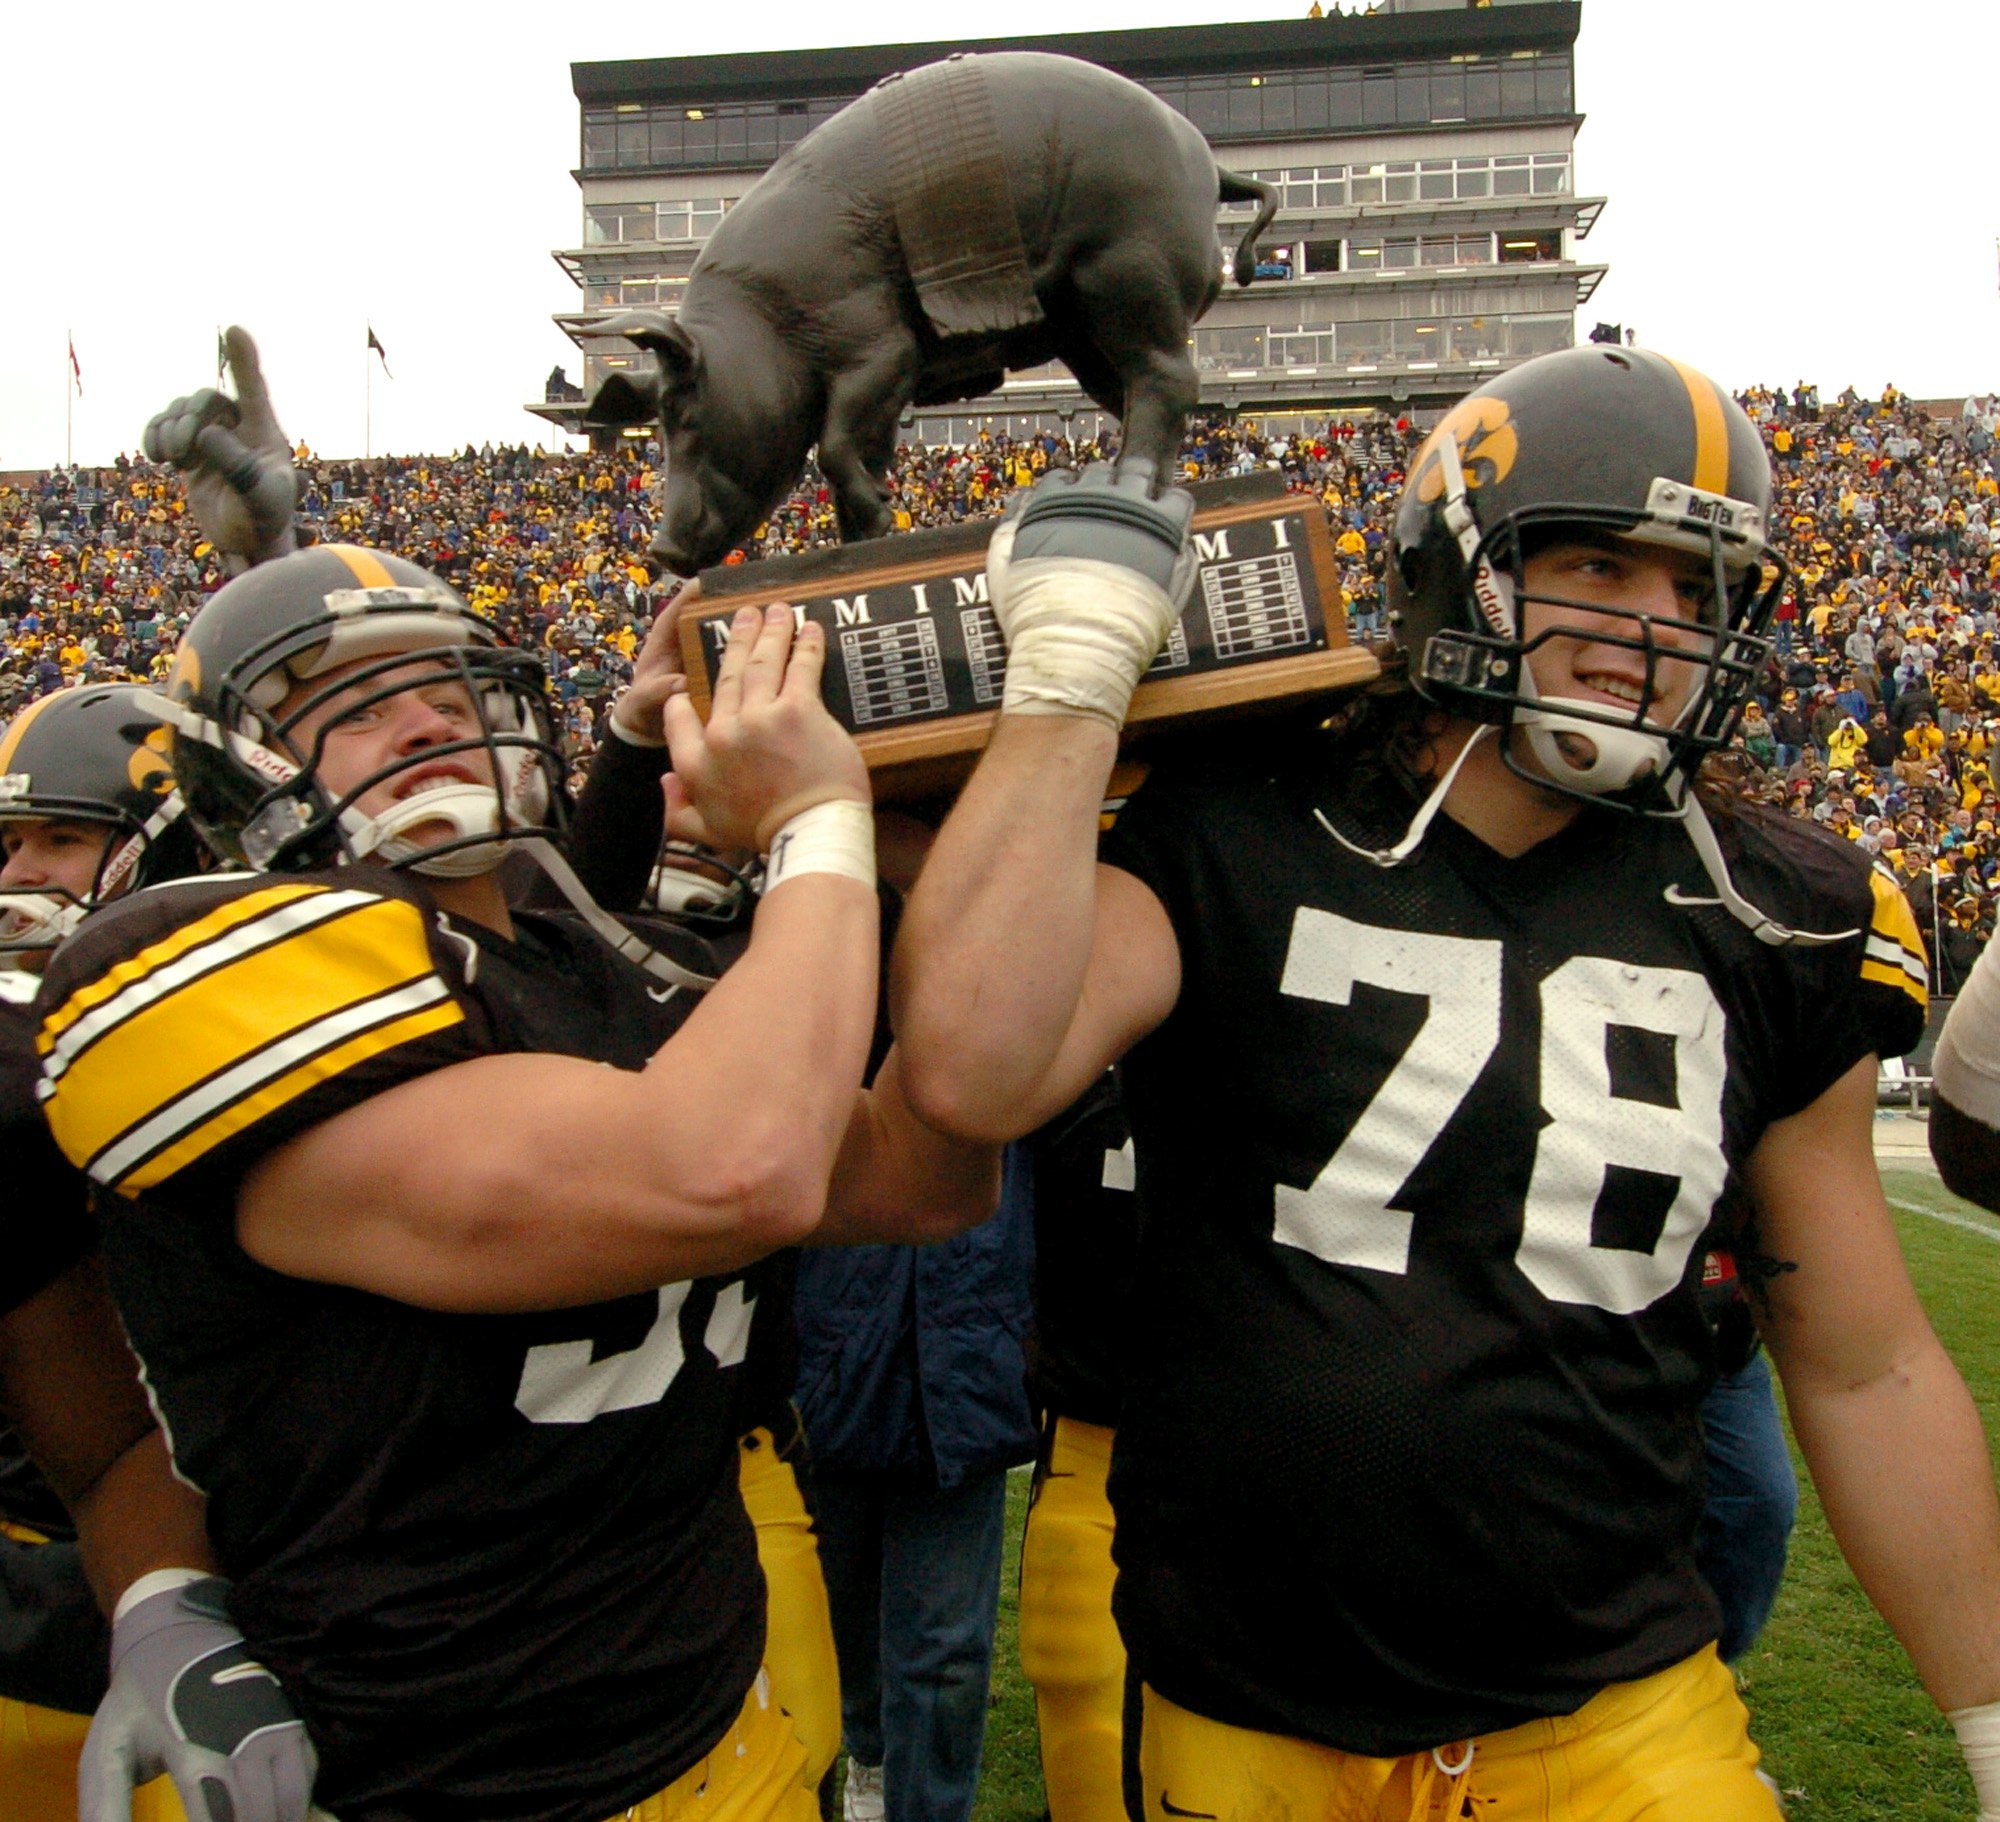 Iowa's Erik Jensen, left, and Iowa's Robert Gallery, right, hoist the bronze pig-shaped trophy known as Floyd of Rosedale in celebration of their 40-22 win over Minnesota, Saturday, Nov. 15, 2003, in Iowa City, Iowa. (AP Photo/Chris Donahue) ORG XMIT: IACD103